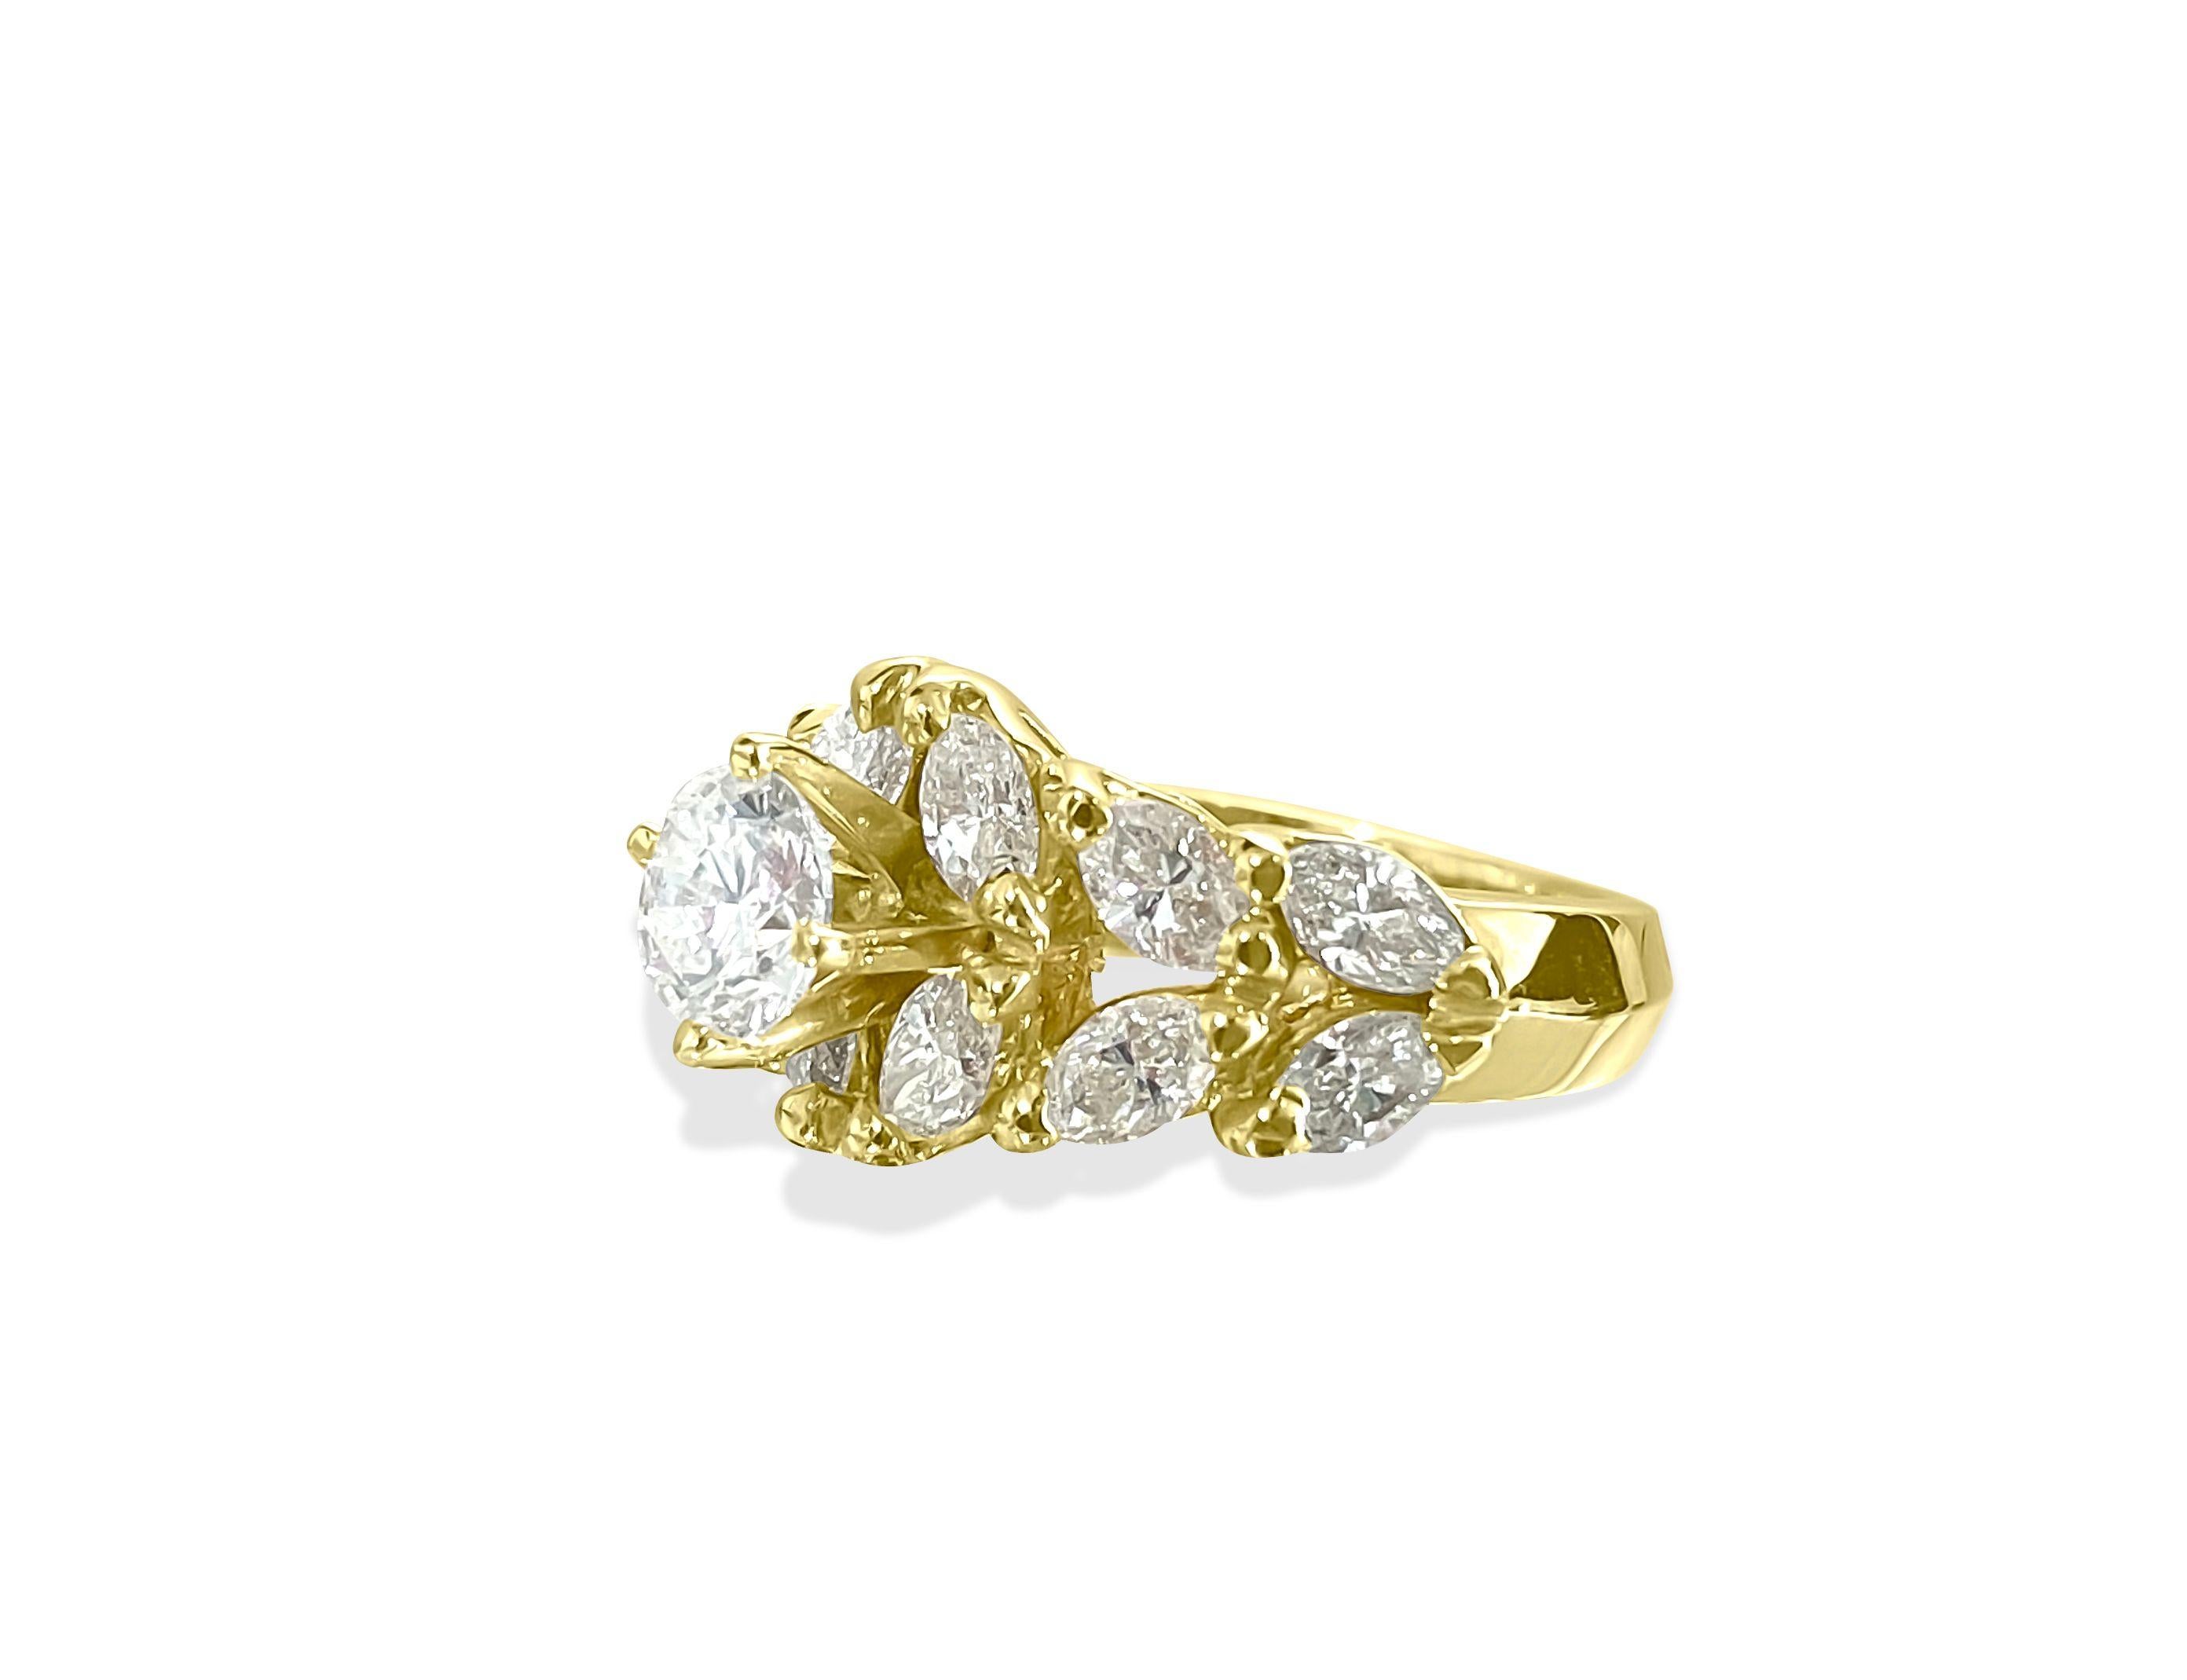 Brilliant Cut 14K Gold, 1.85 CT Diamond Engagement Ring. For Sale